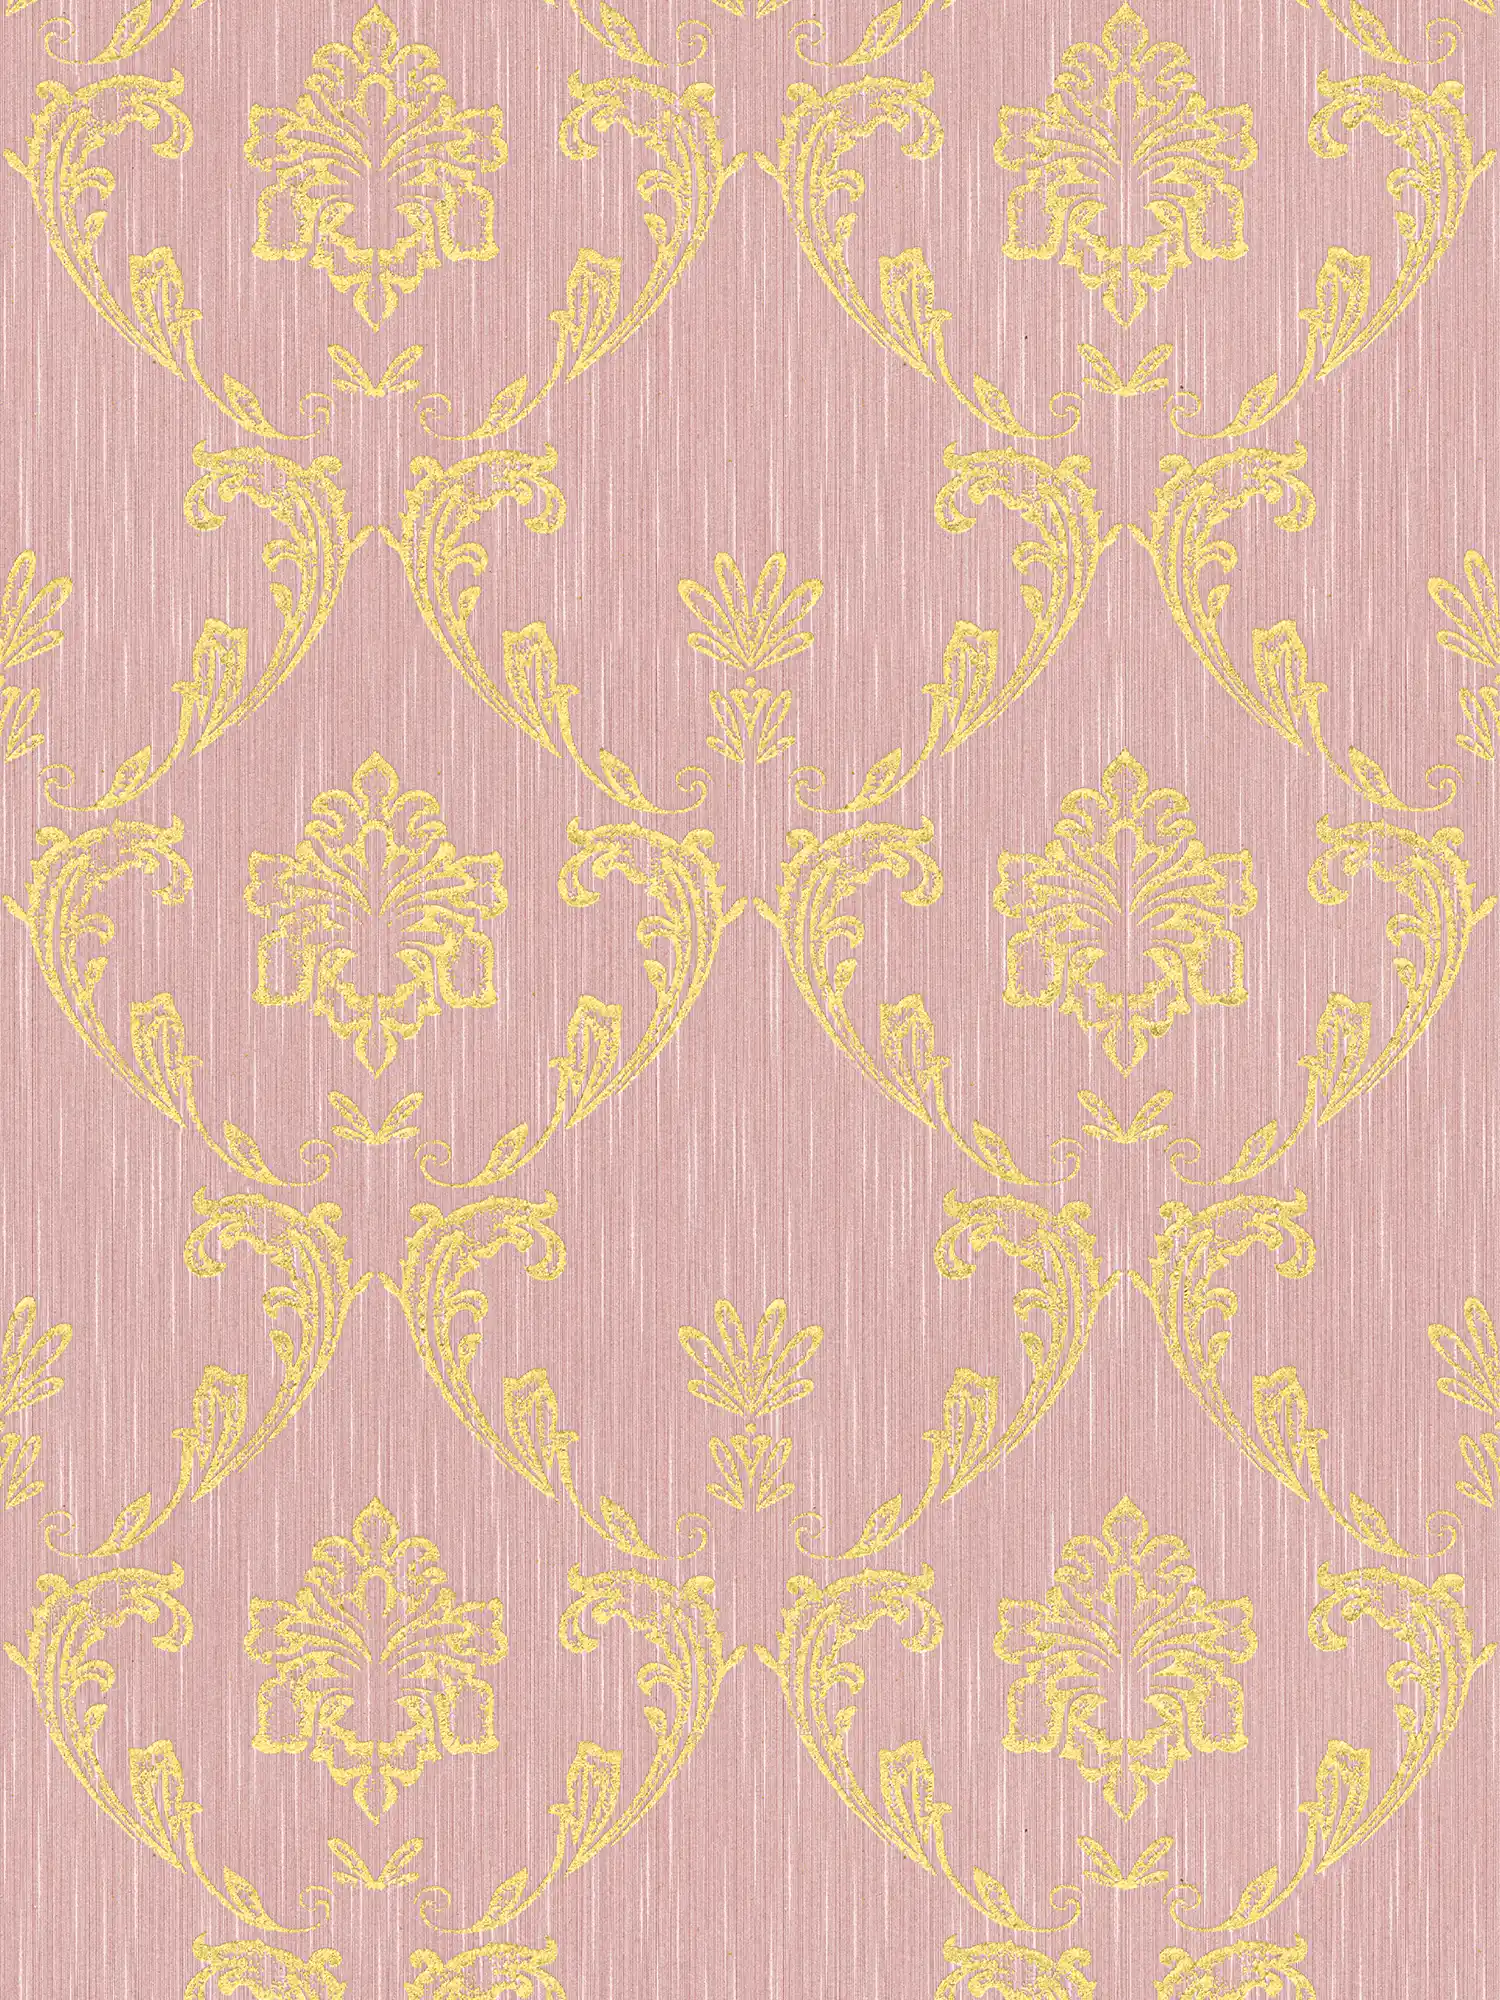 Ornamental wallpaper with floral elements in gold - gold, pink
